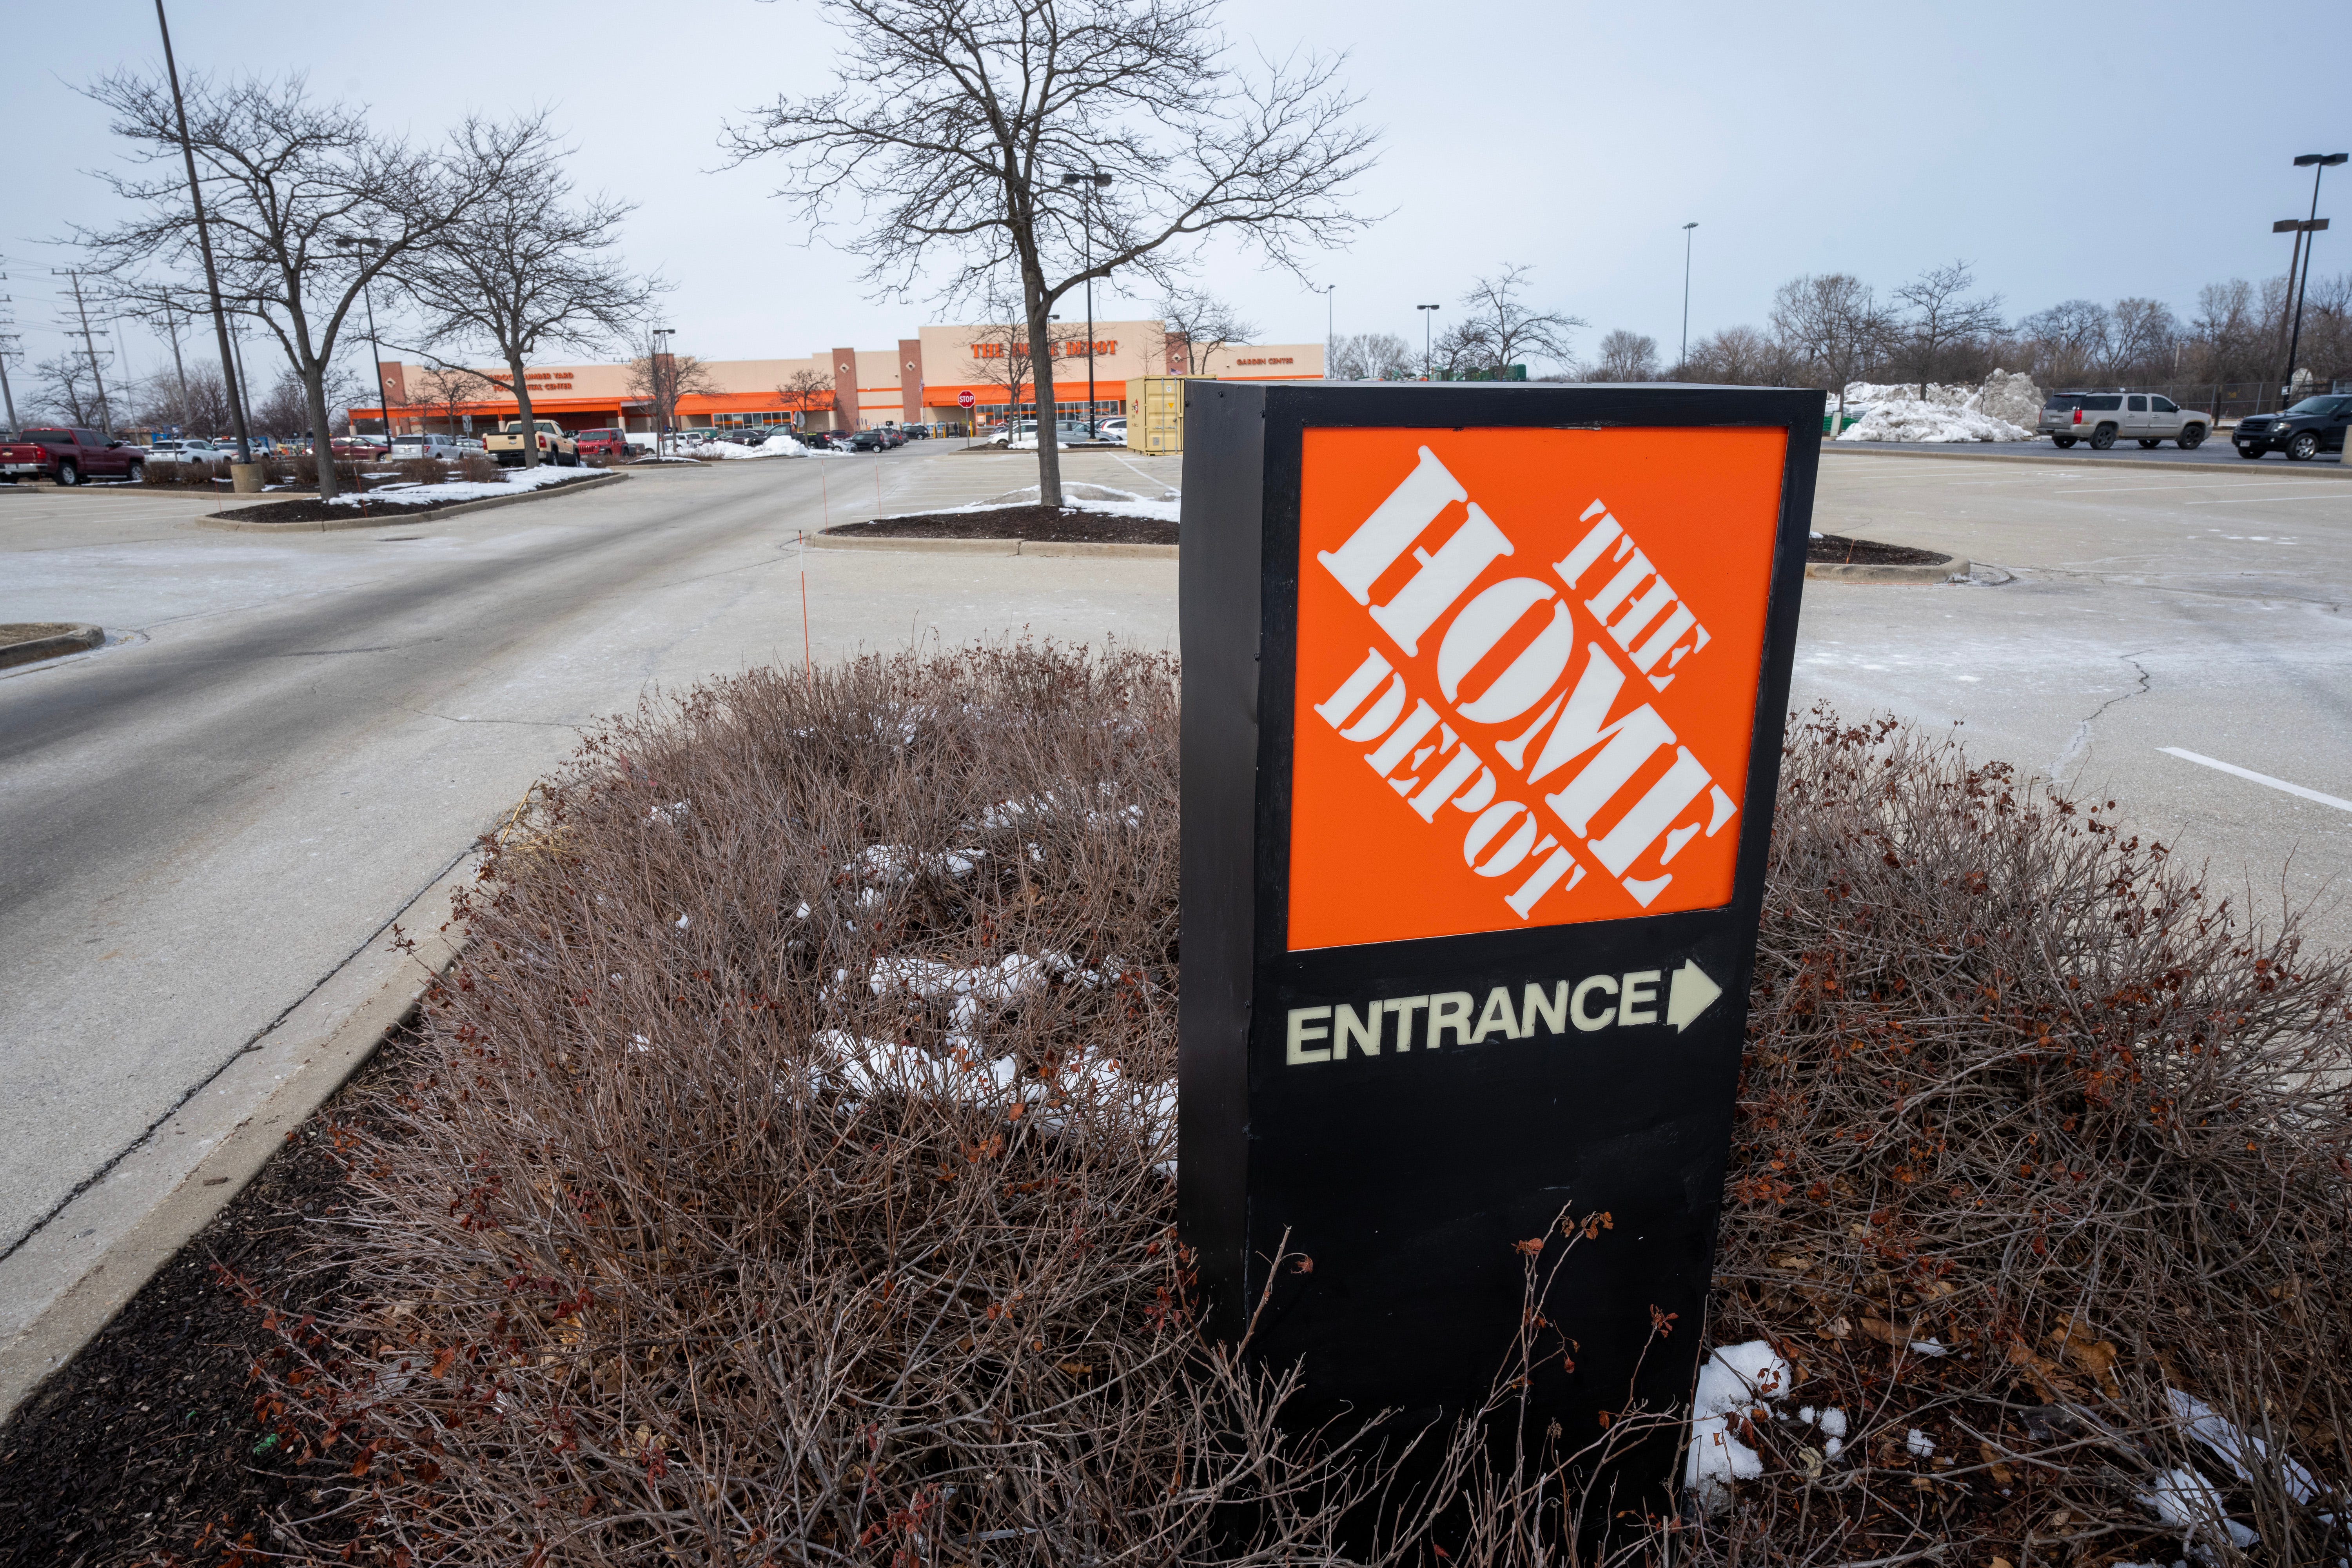 The south parking lot of Home Depot at 4100 N. 124th St. in Wauwatosa, Wis.